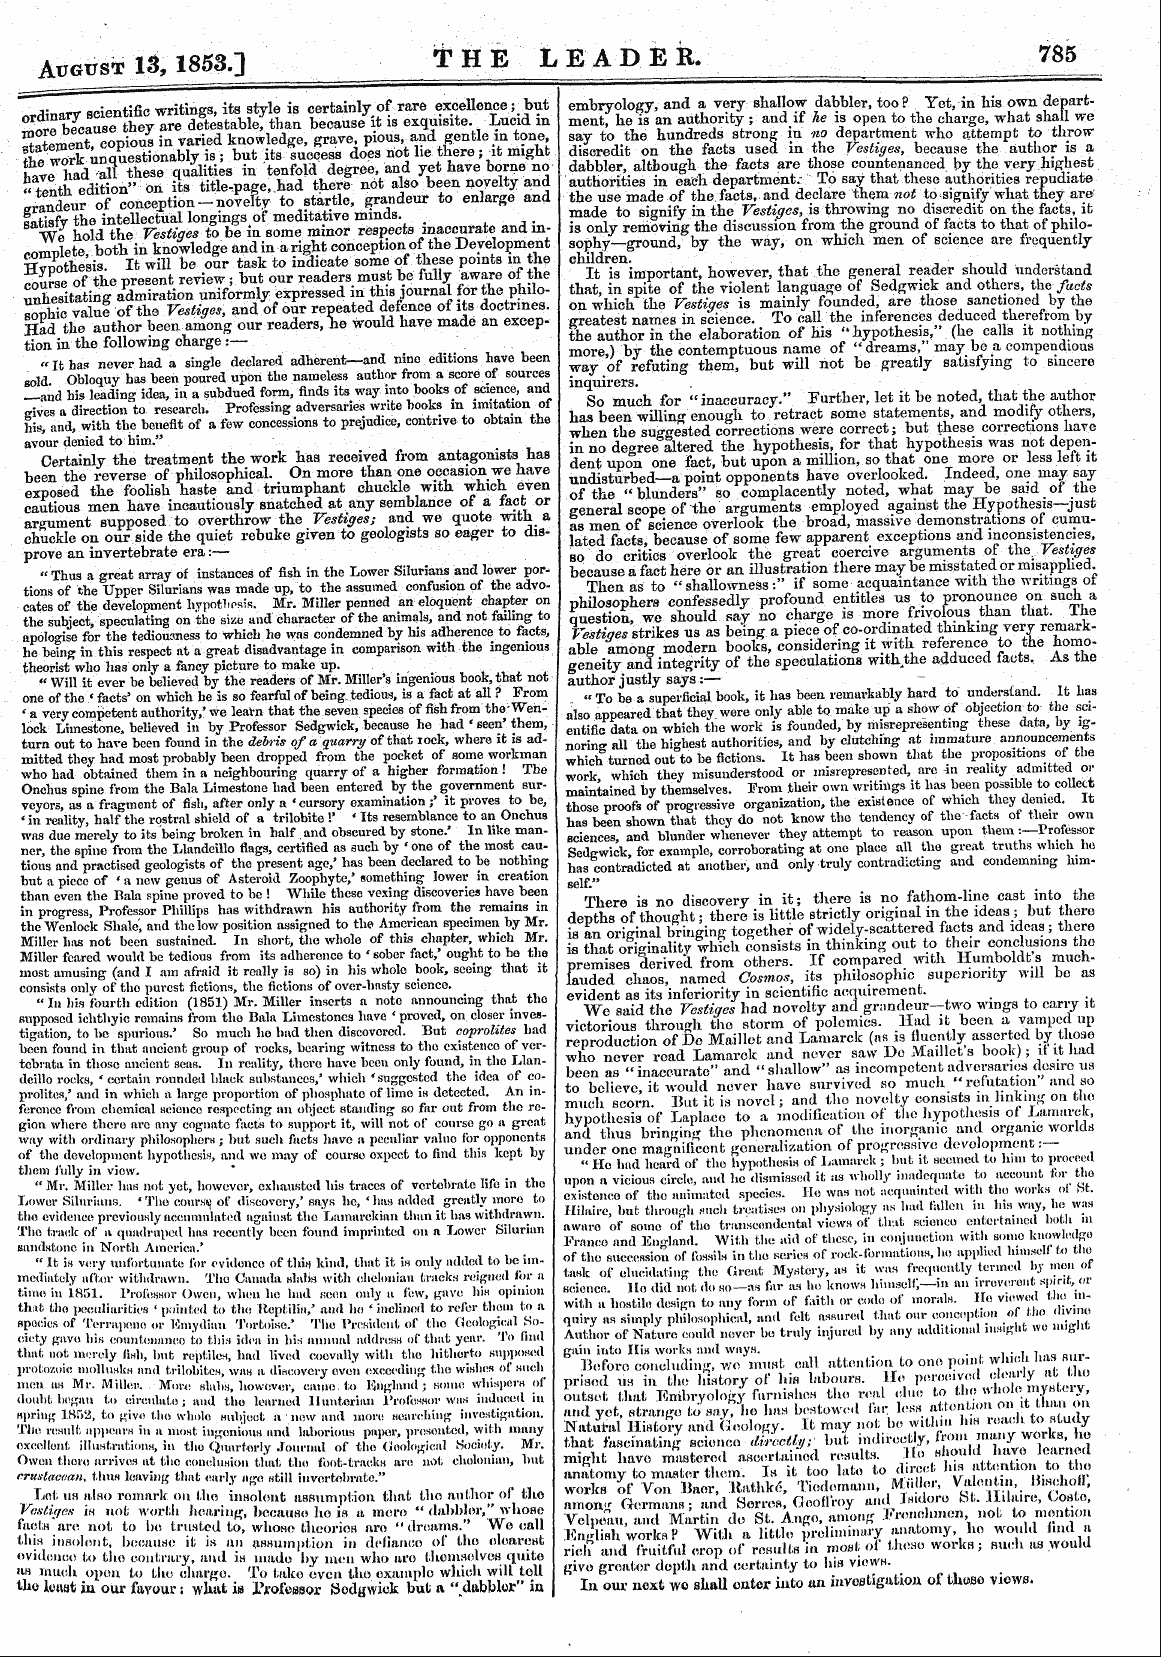 Leader (1850-1860): jS F Y, Country edition - Attest 13, 1853.] The Leader. 785